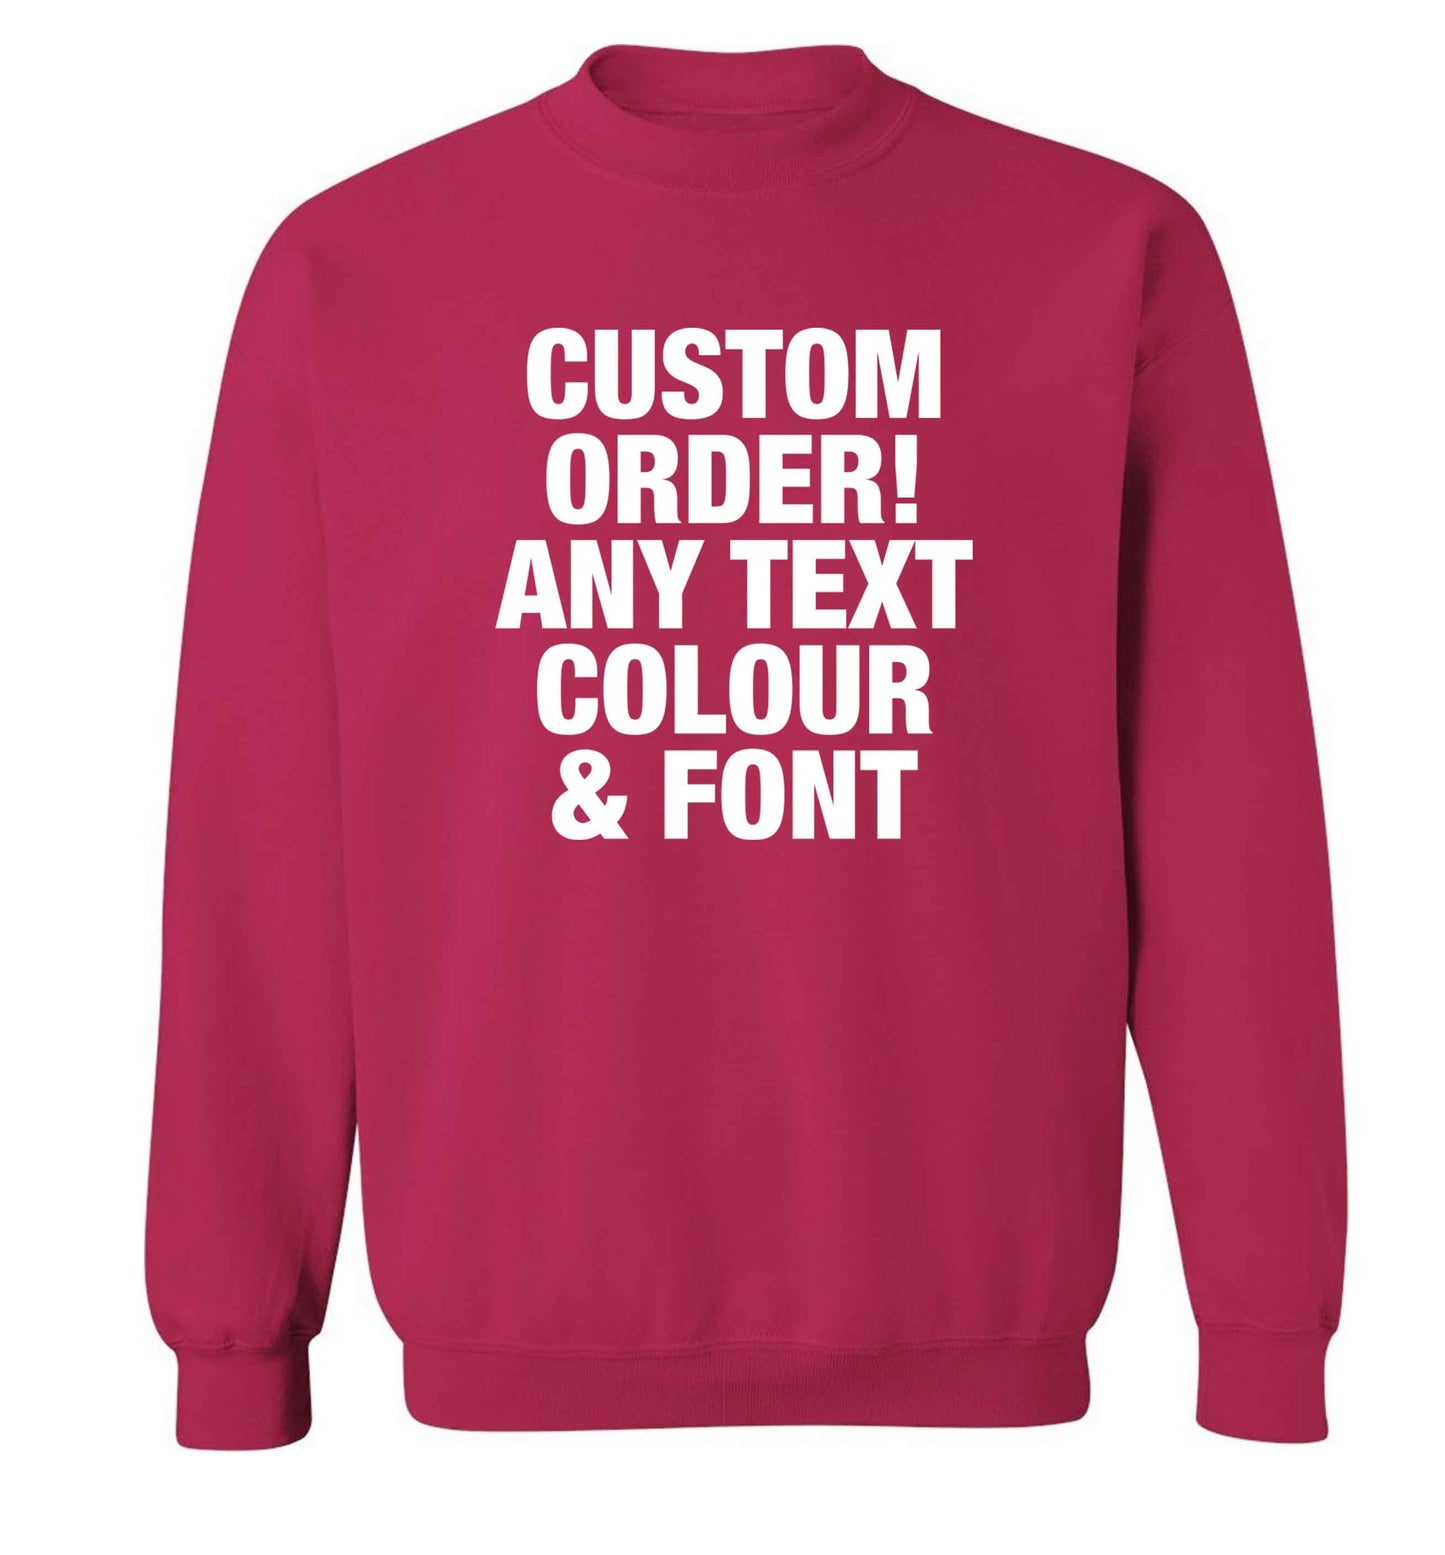 Custom order any text colour and font adult's unisex pink sweater 2XL